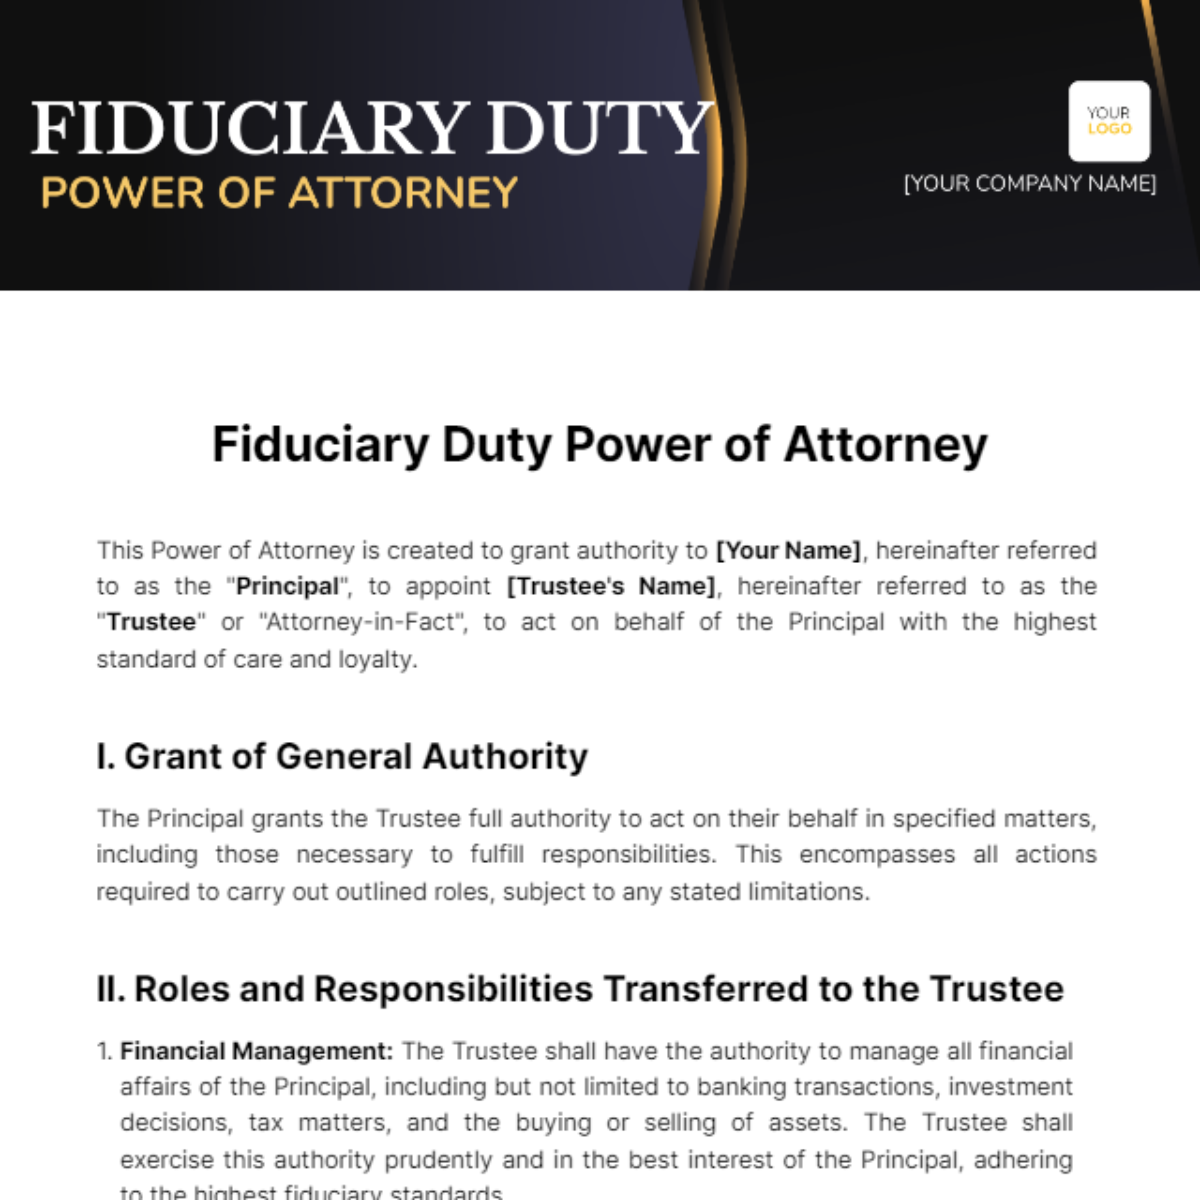 Fiduciary Duty Power of Attorney Template